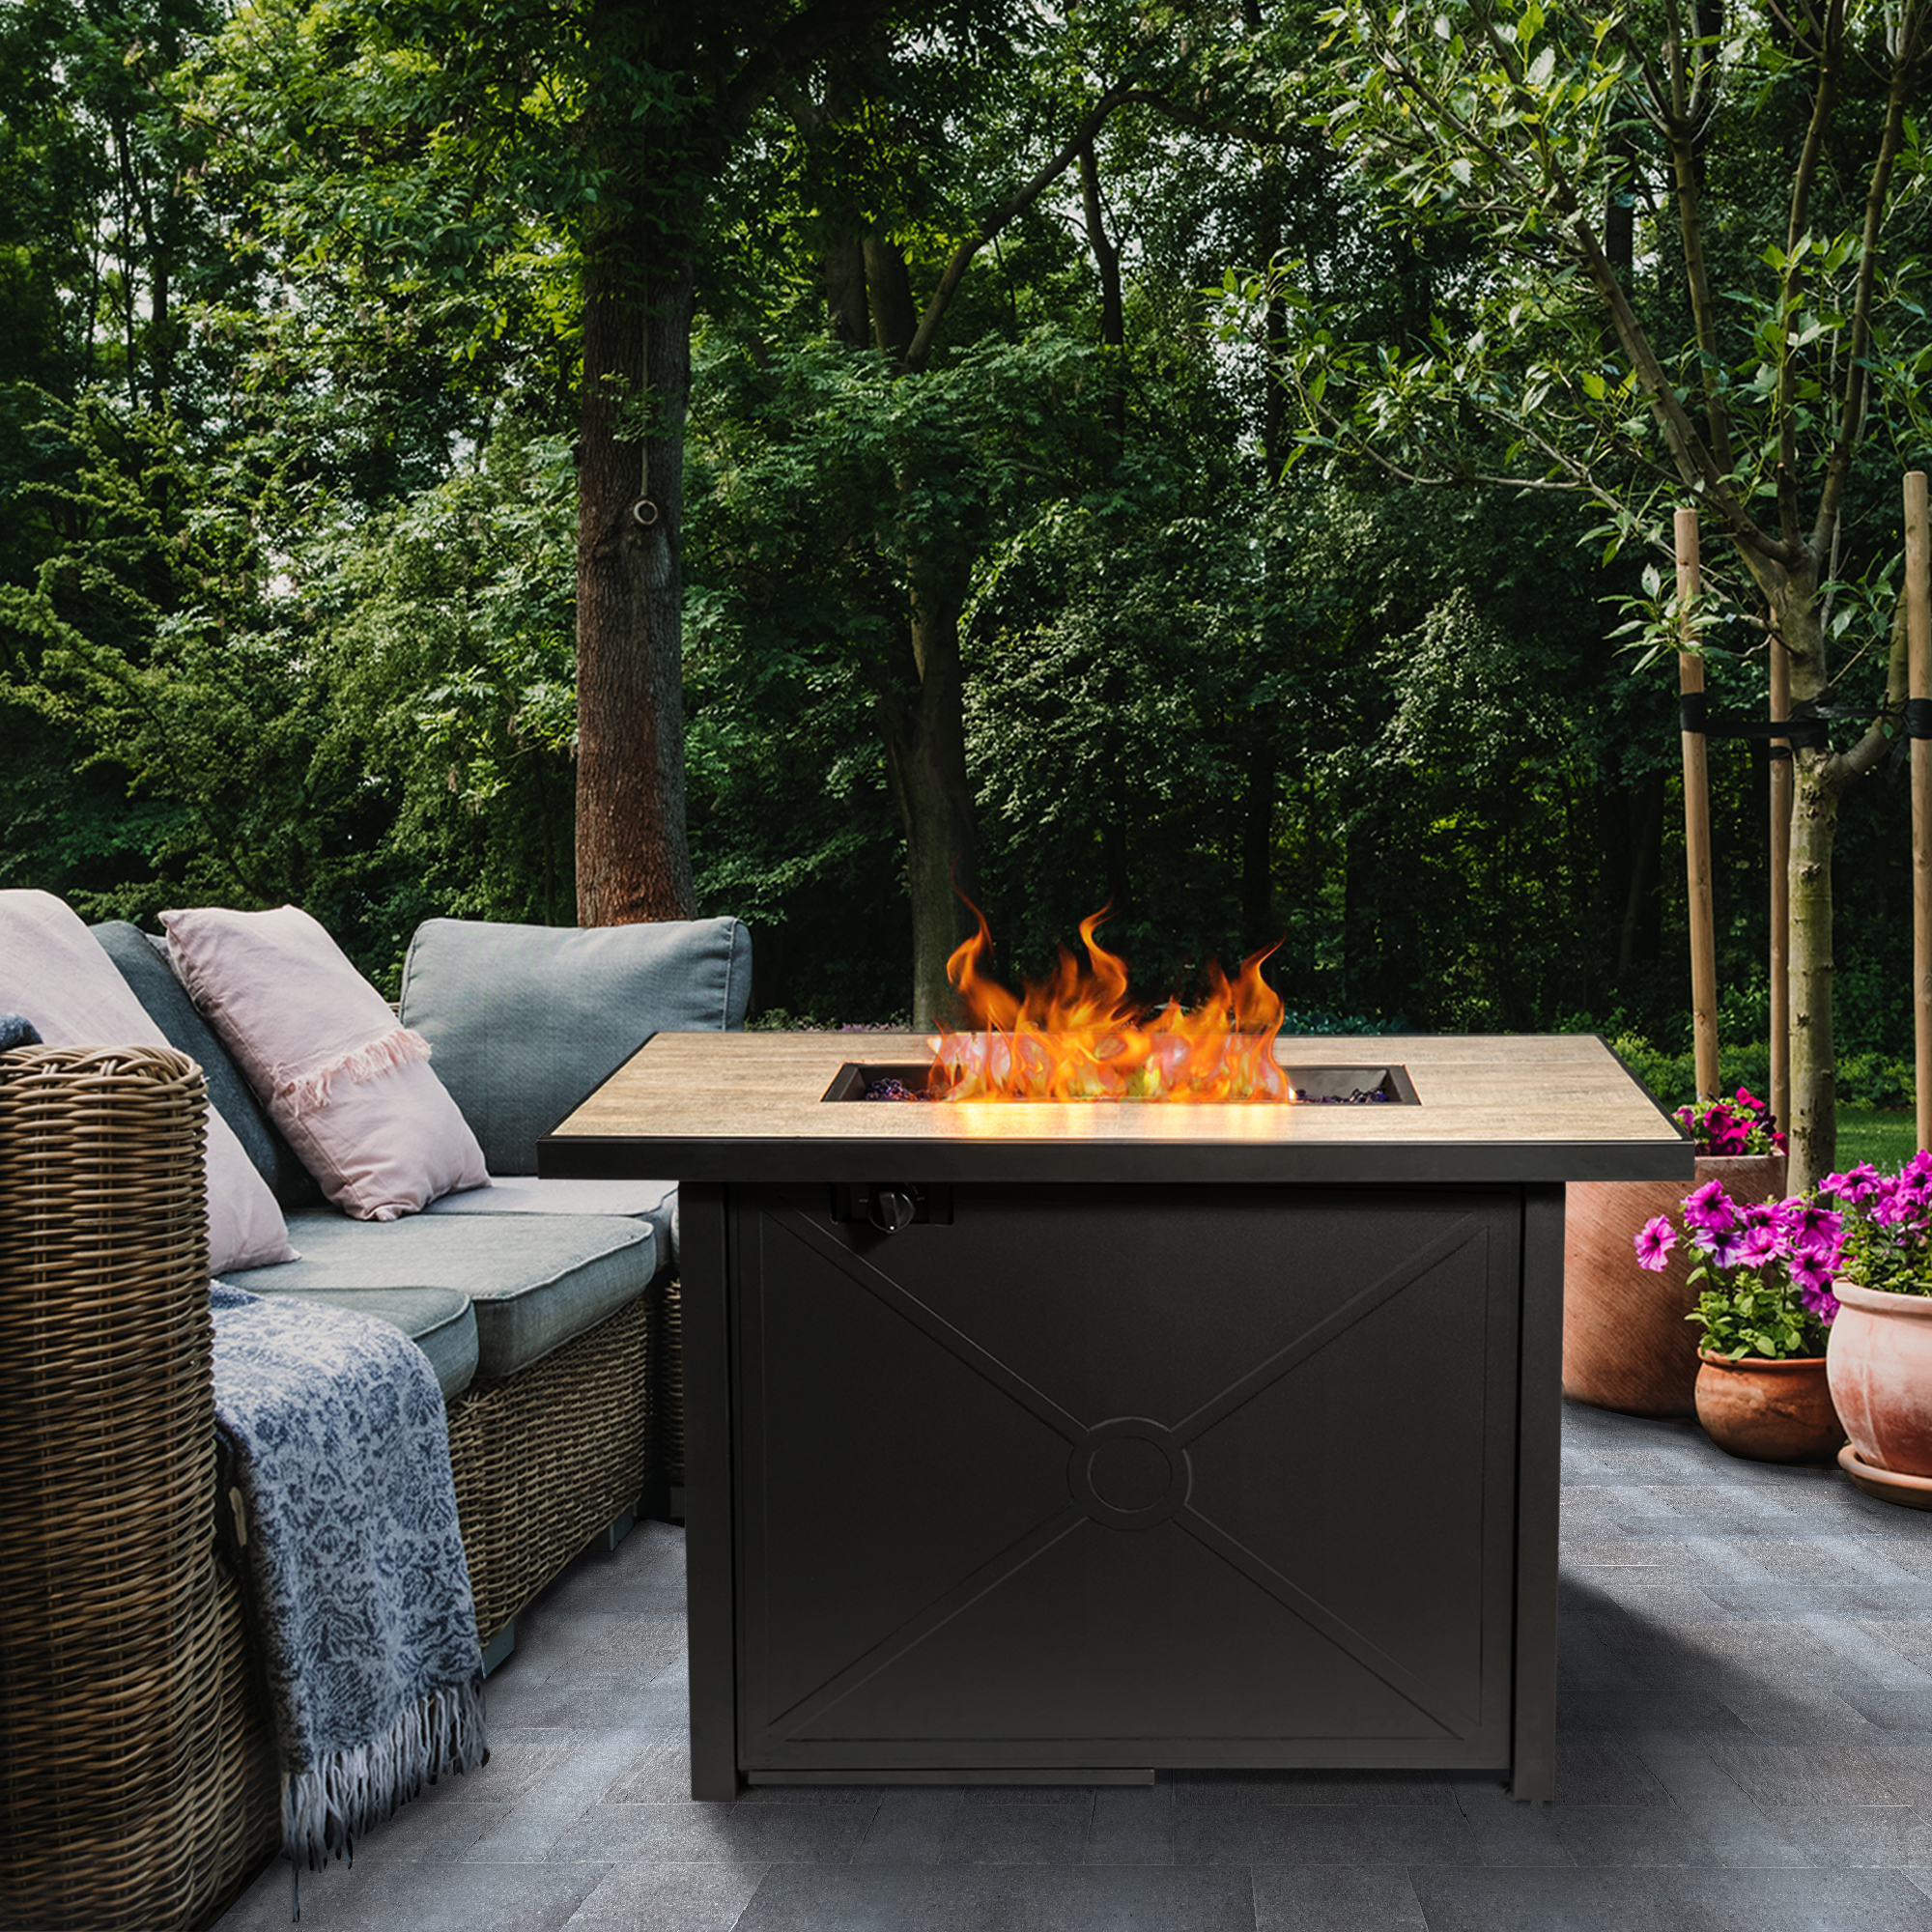 Peaktop Firepit Outdoor Gas Fire Pit, Outdoor Gas Fire Pit Kit